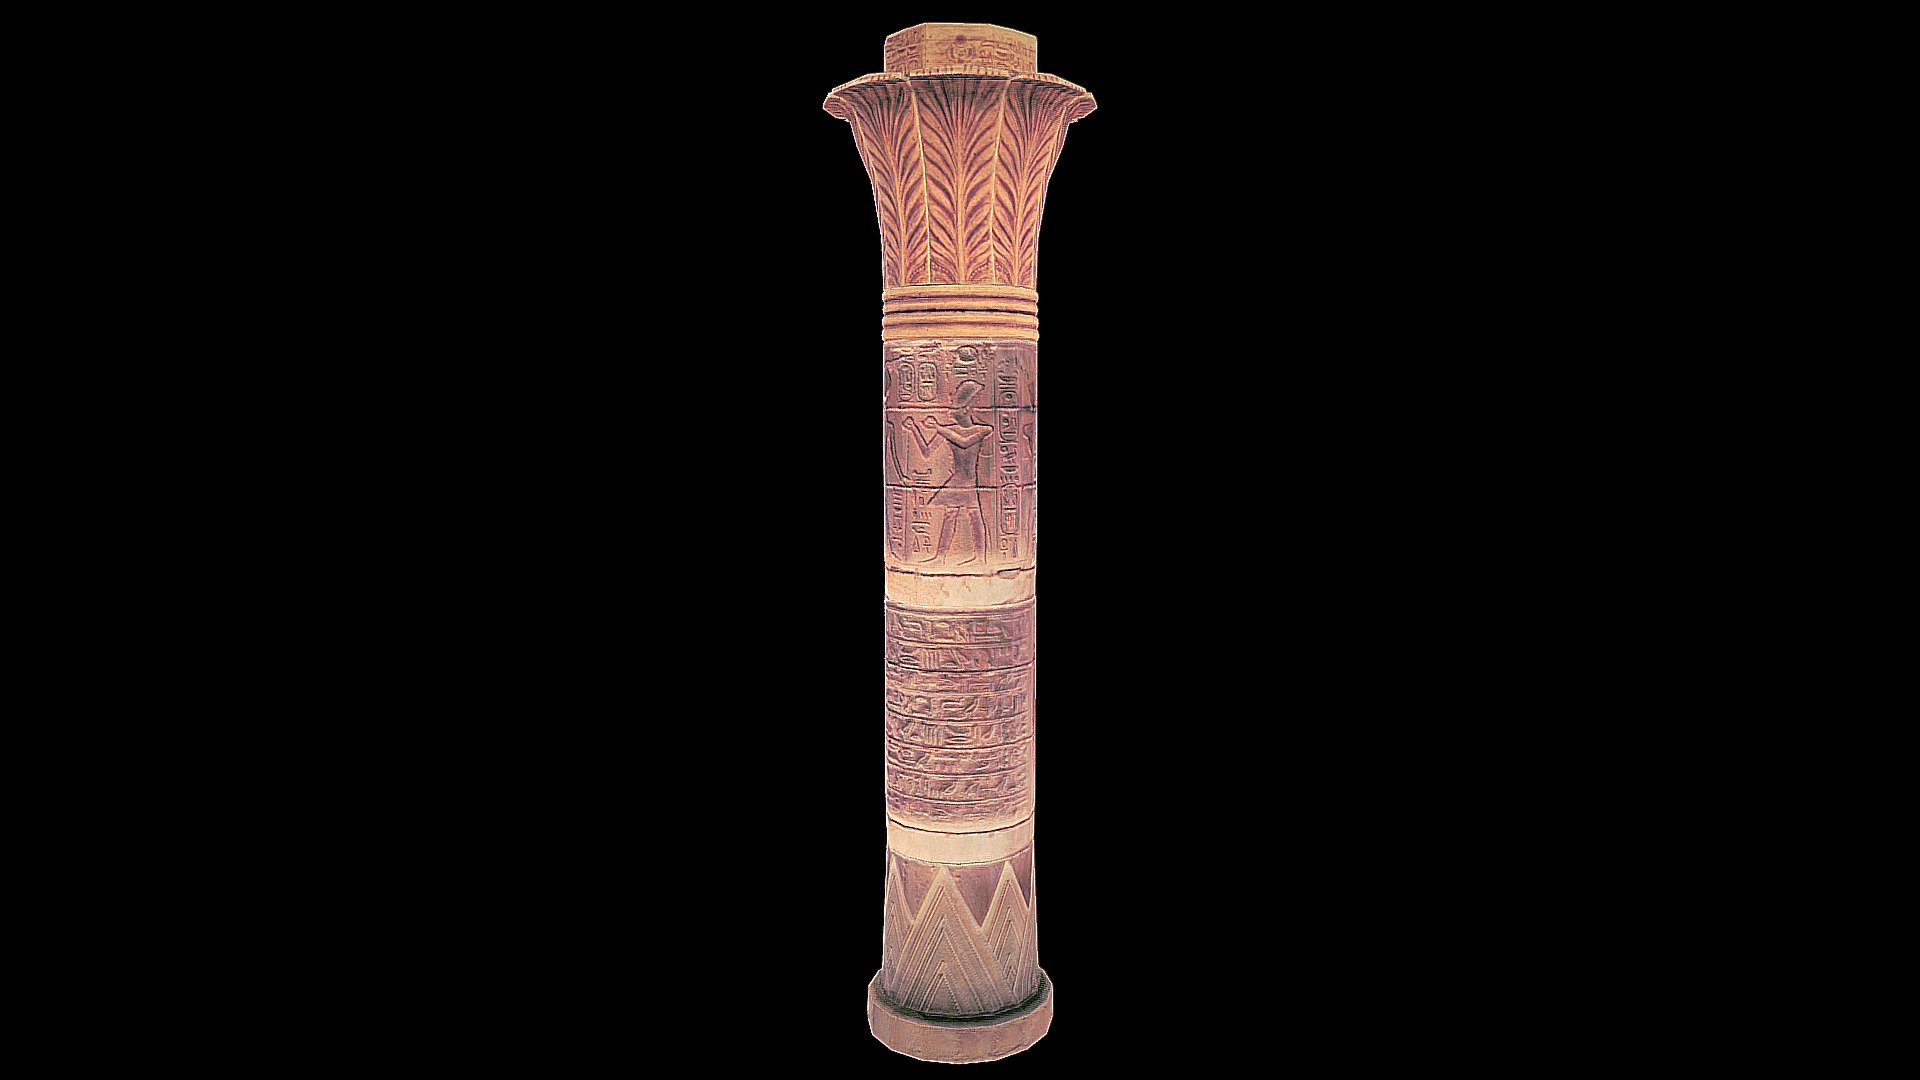 anciebt egypt column:




Fluted_Column low poly asset with 5 Textures Maps Color / AO/ Cavity/ Normal and Rough (2048x2048)

File Format Obj

Enjoy - Fluted_Column - Buy Royalty Free 3D model by Joff3D 3d model